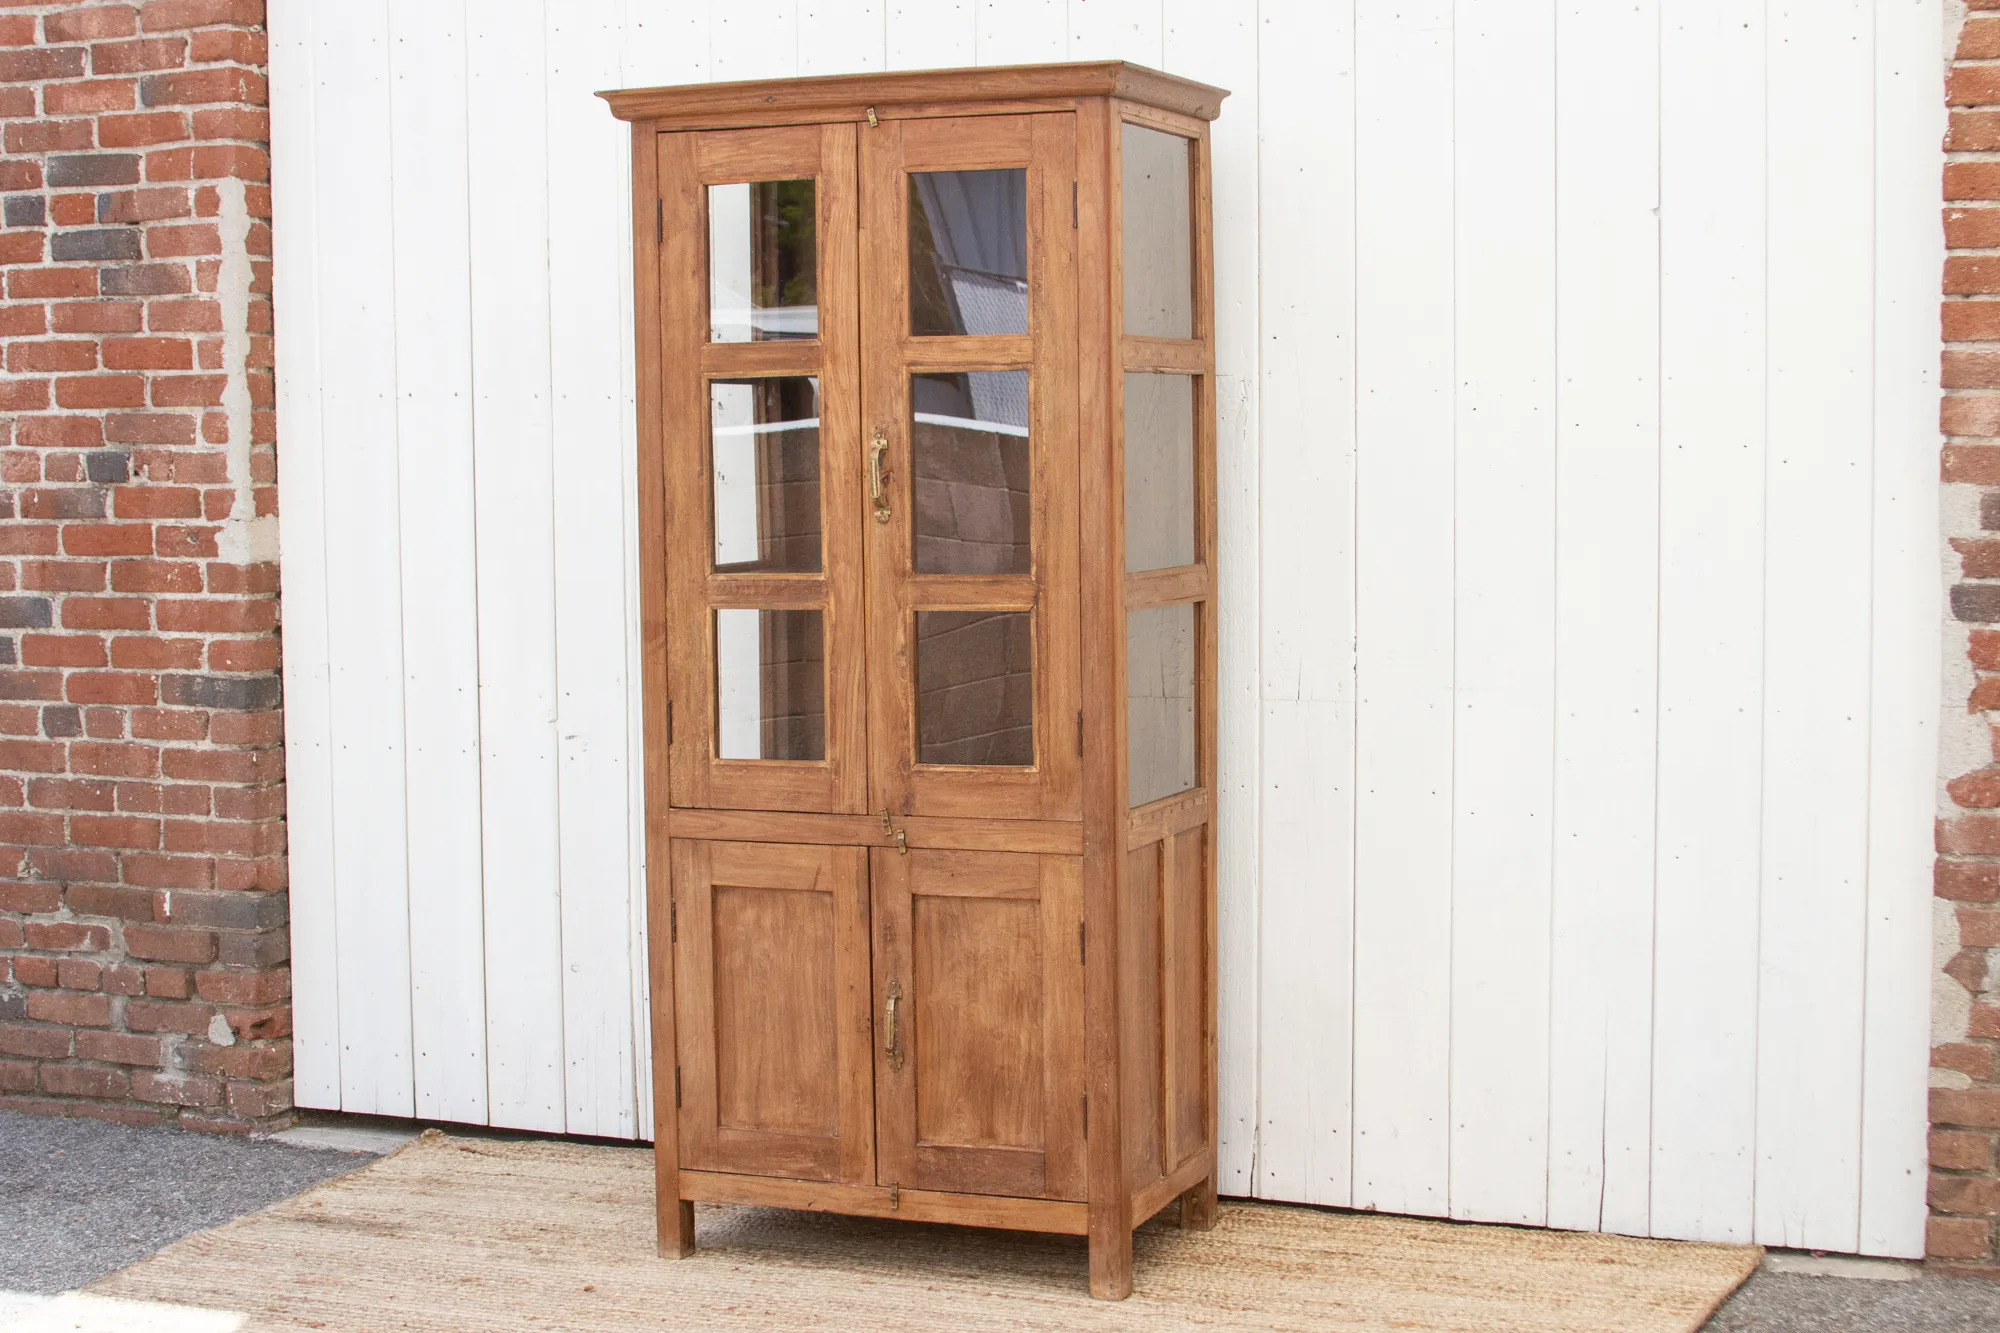 19th Century Tall Colonial Glass Cabinet - Brown